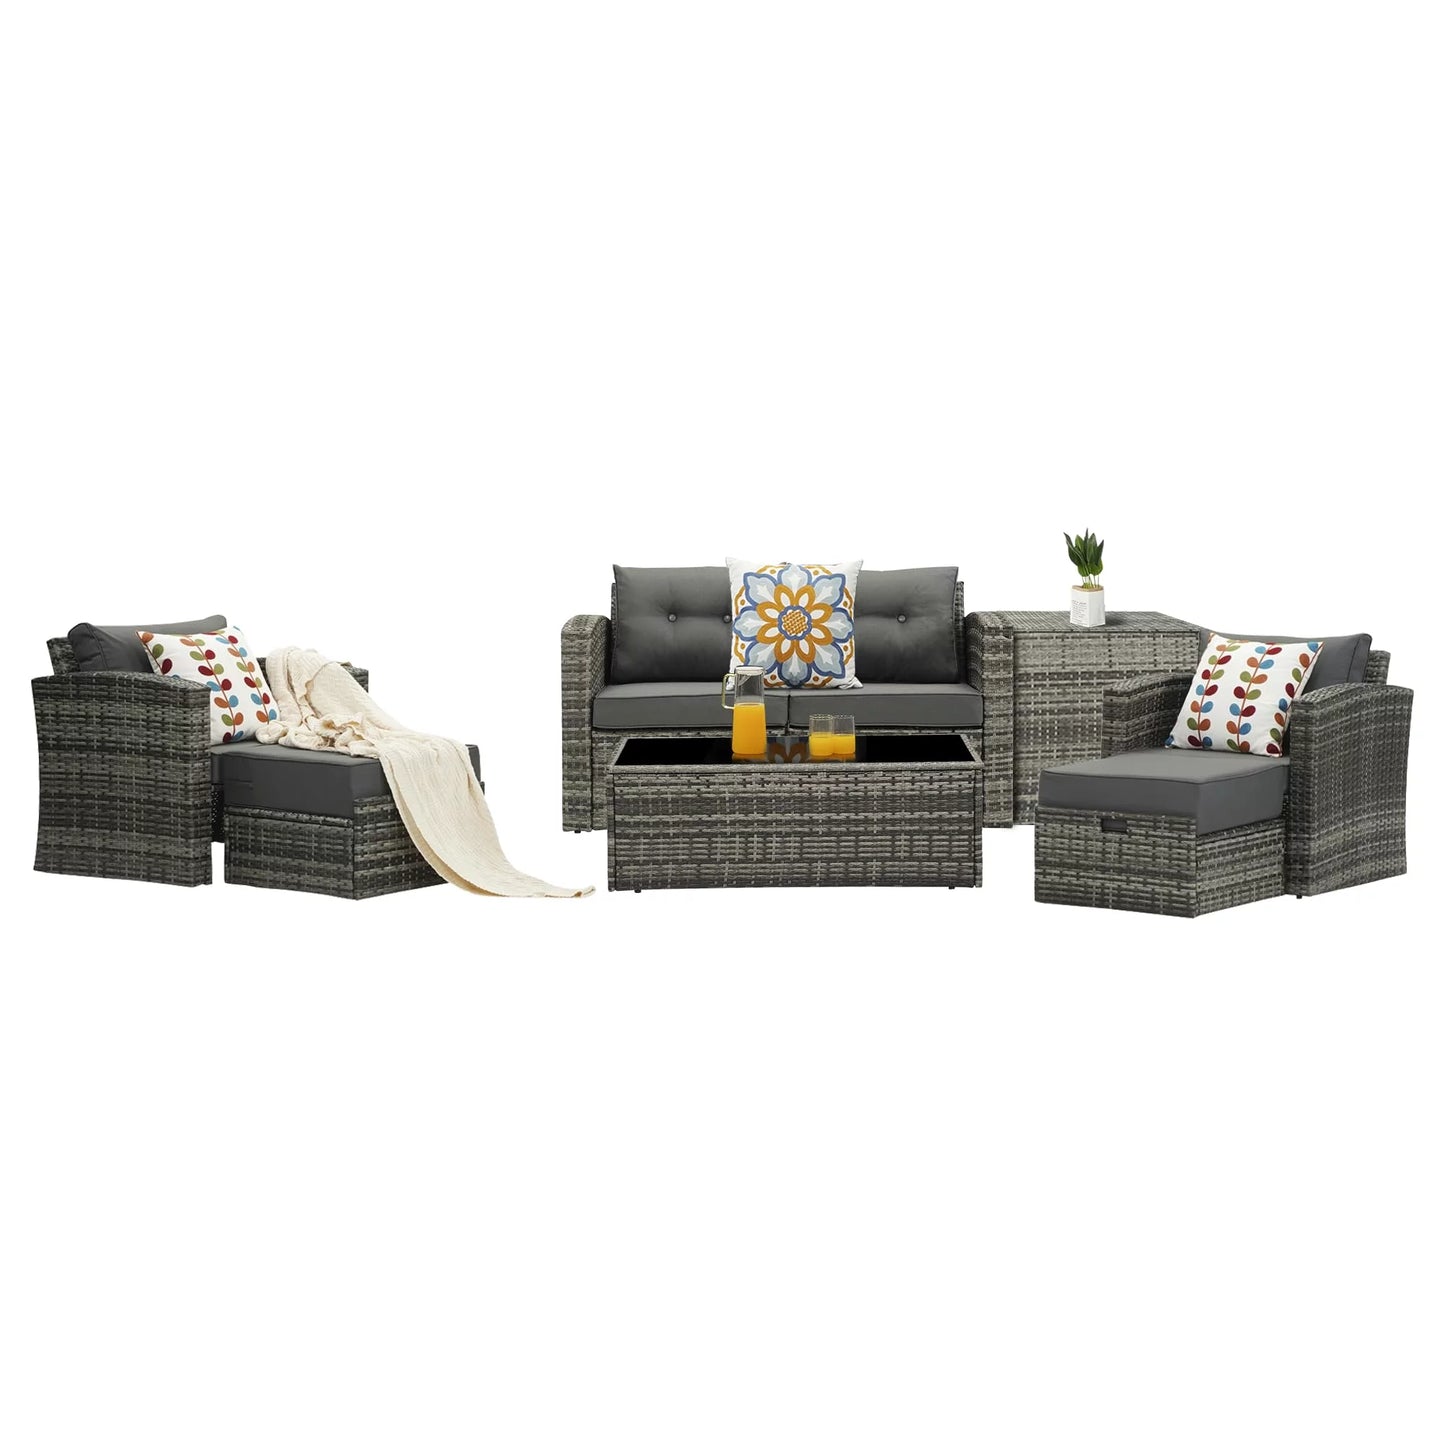 Royalcraft Outdoor Patio Furniture,10 Pieces All-Weather Patio Conversation Set Wicker Sectional Sofa with Non-slip Cushions,Aluminum Frame,Grey